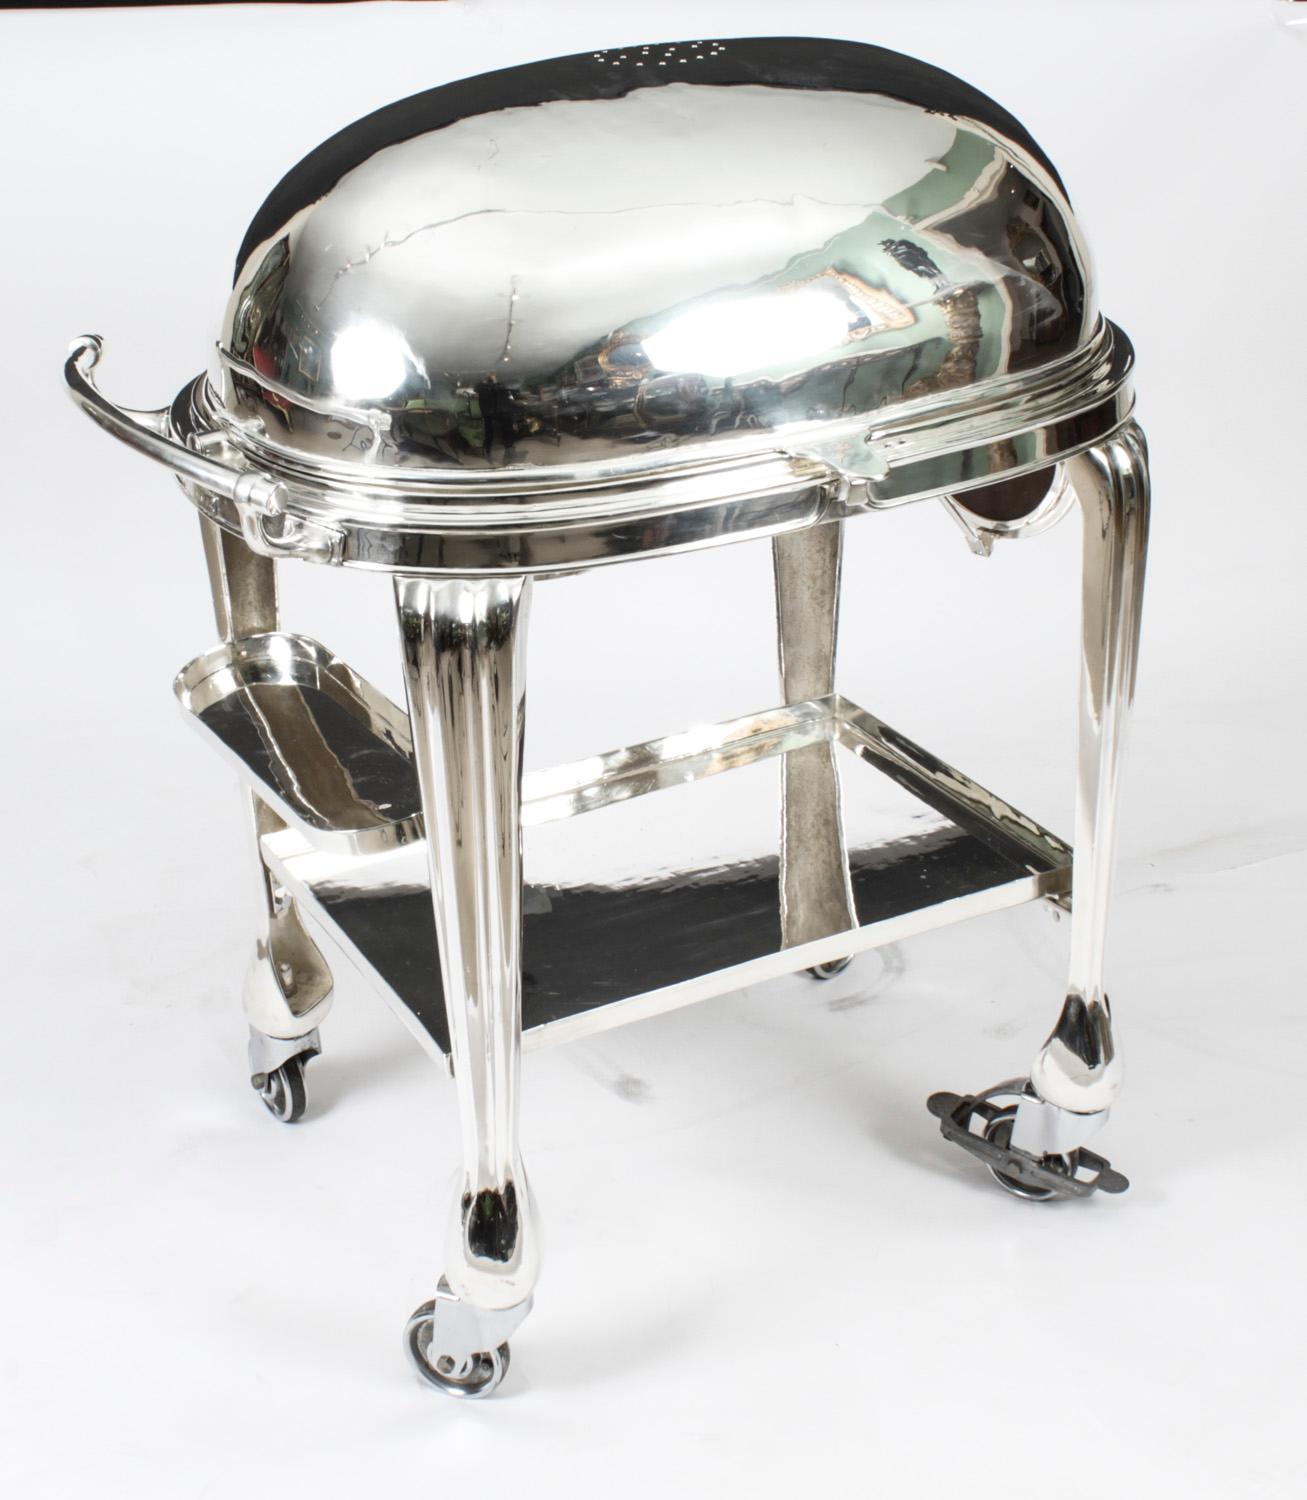 Antique Art Deco Silver Plated Beef Carving Trolley Cart by Elkington 1930s 3